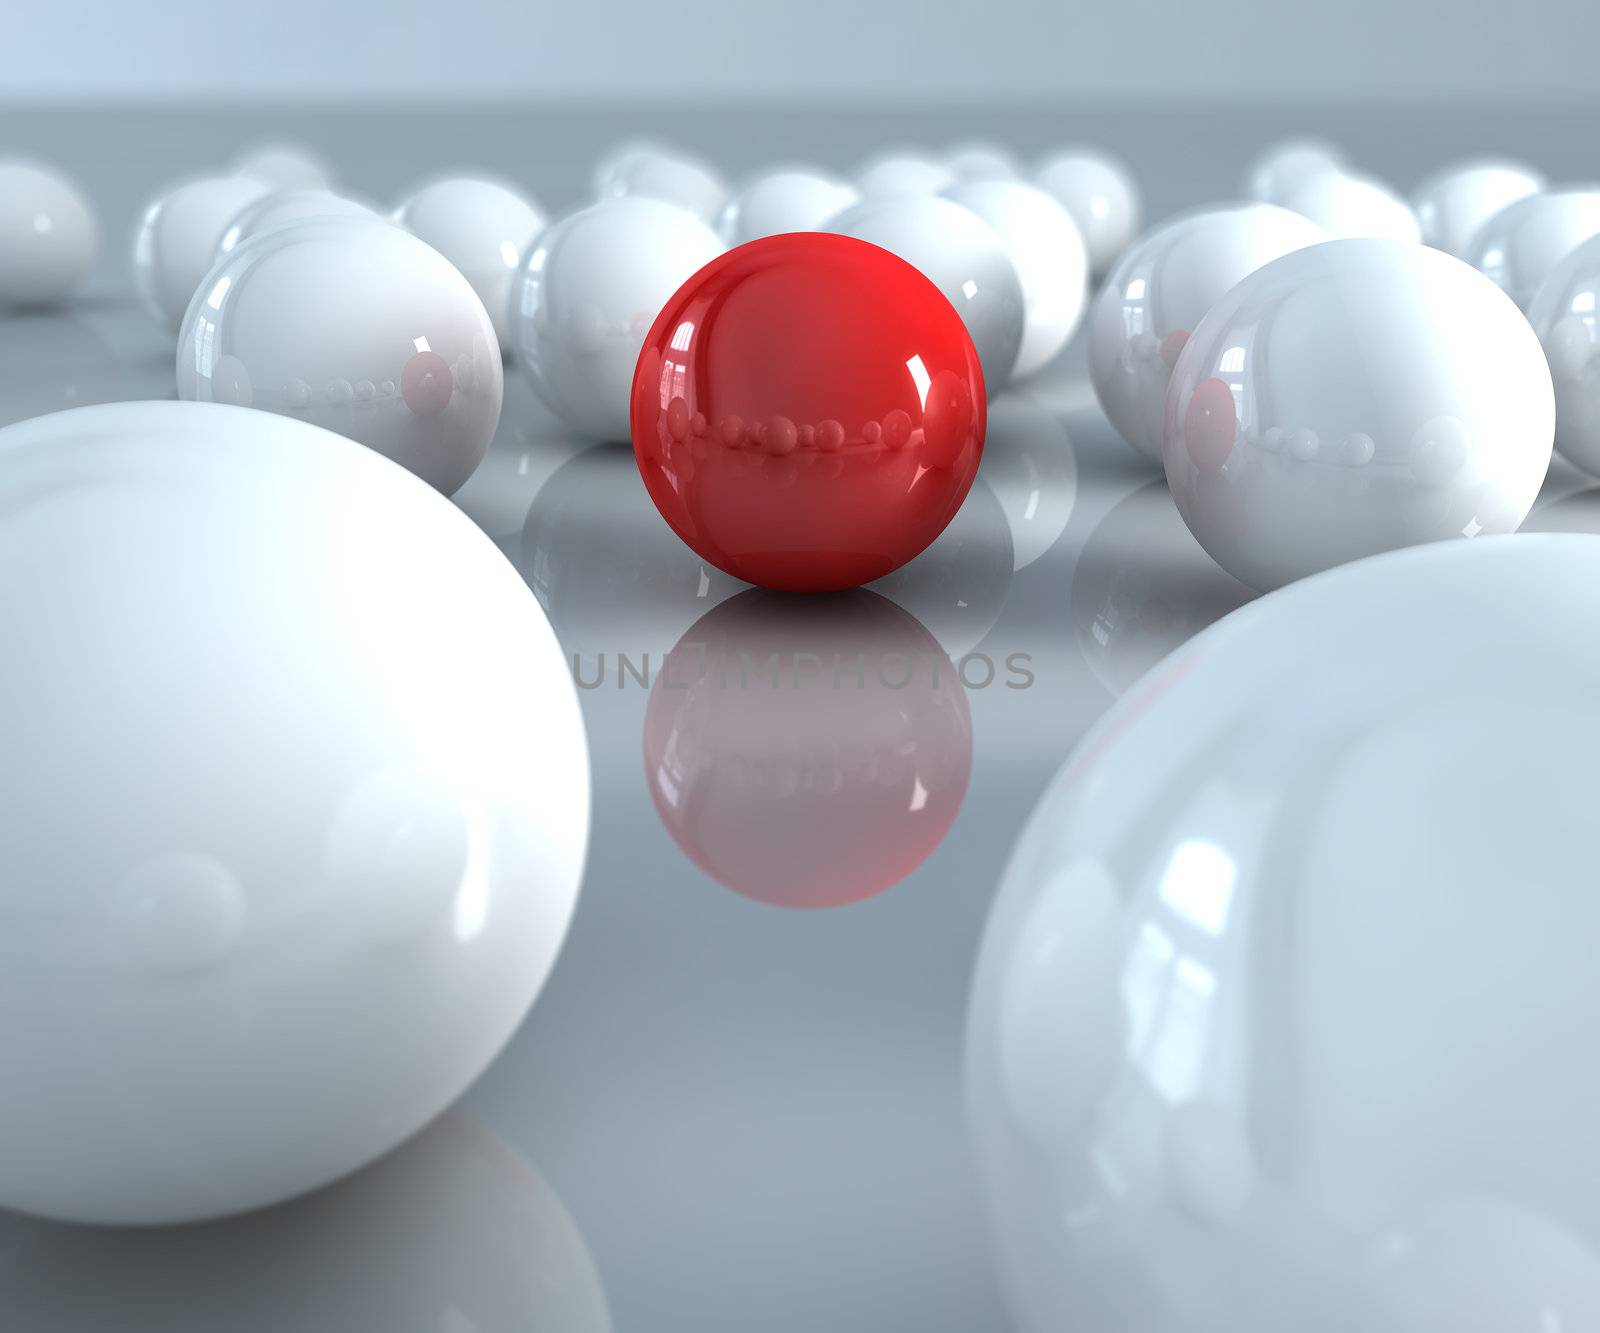 A red ball in many white balls